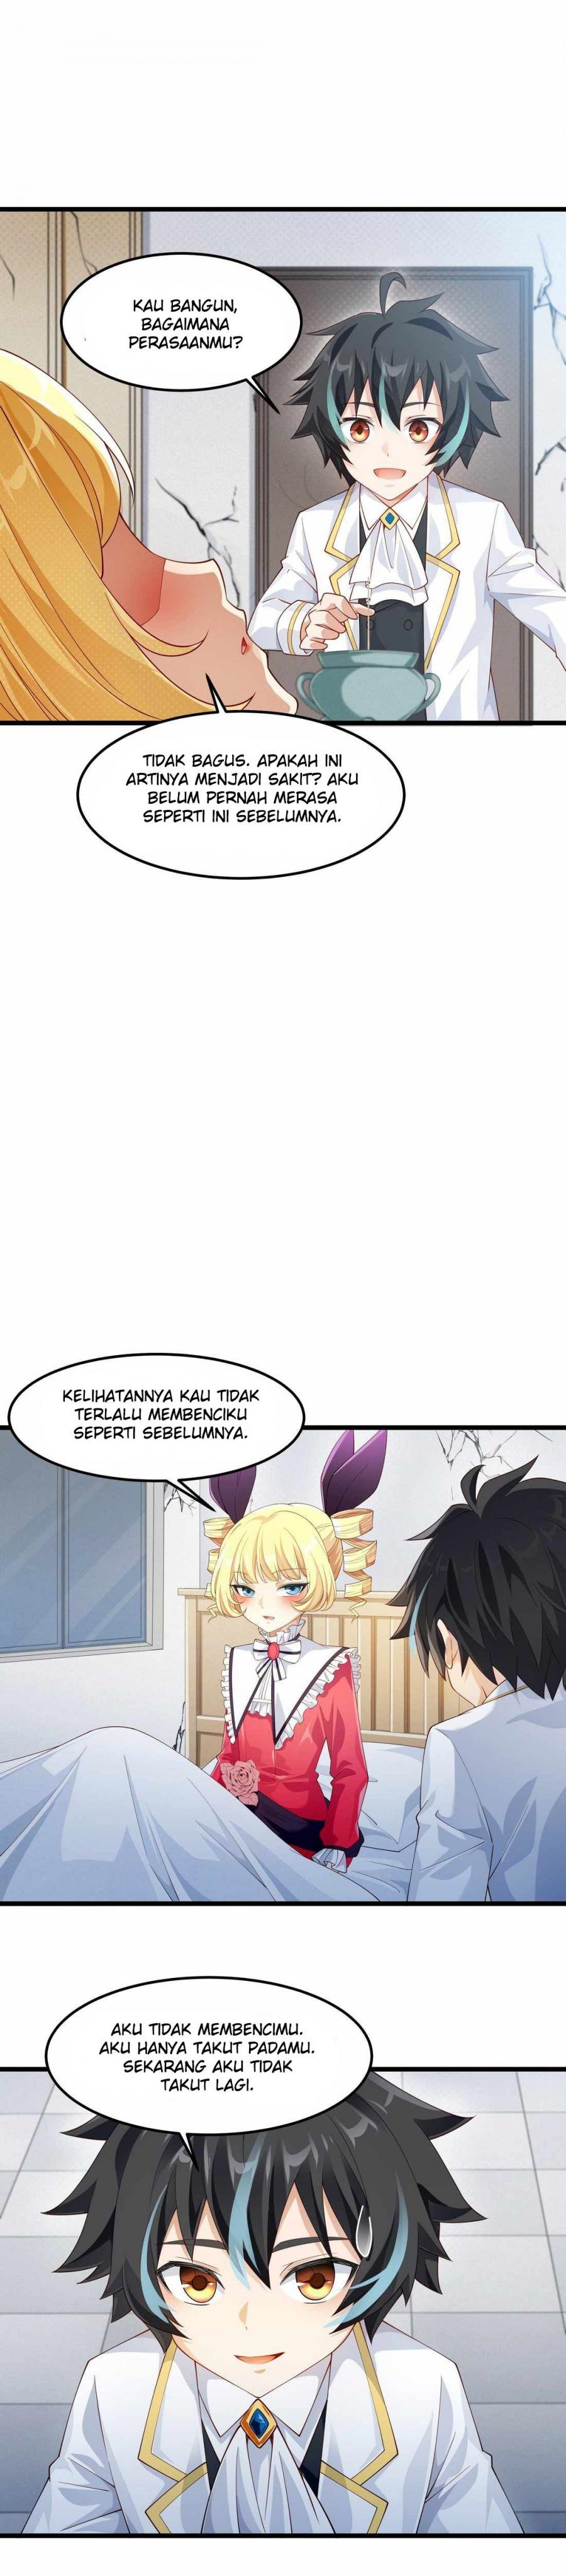 Dilarang COPAS - situs resmi www.mangacanblog.com - Komik little tyrant doesnt want to meet with a bad end 016 - chapter 16 17 Indonesia little tyrant doesnt want to meet with a bad end 016 - chapter 16 Terbaru 17|Baca Manga Komik Indonesia|Mangacan